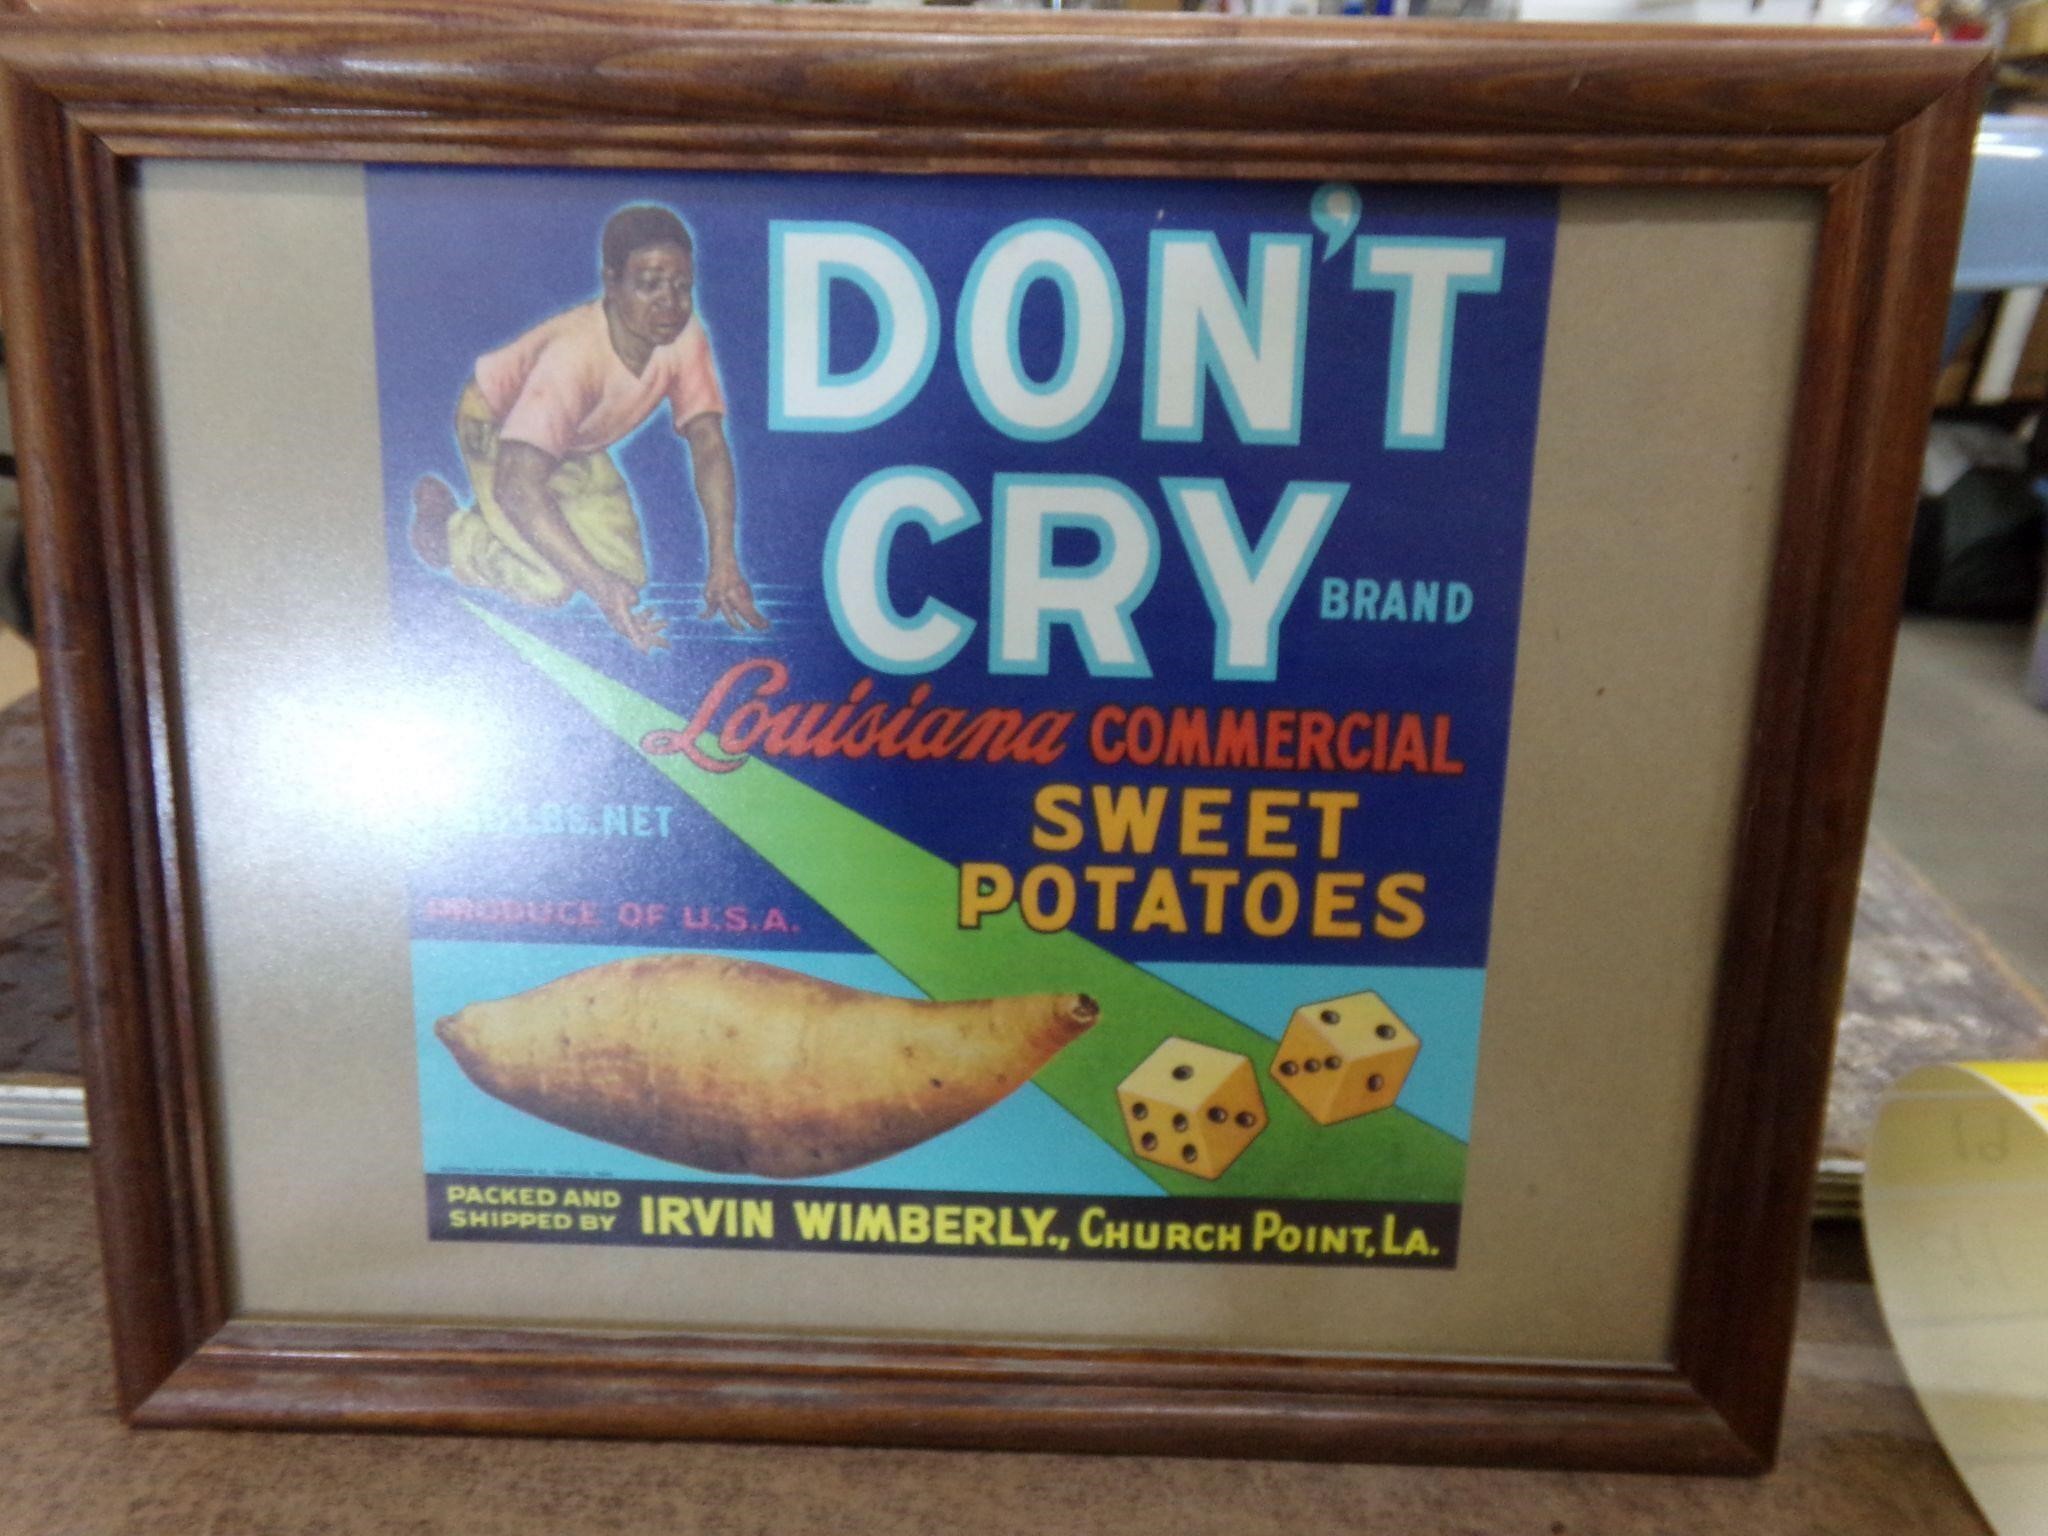 Vintage Don't cry Sweet potatoes label